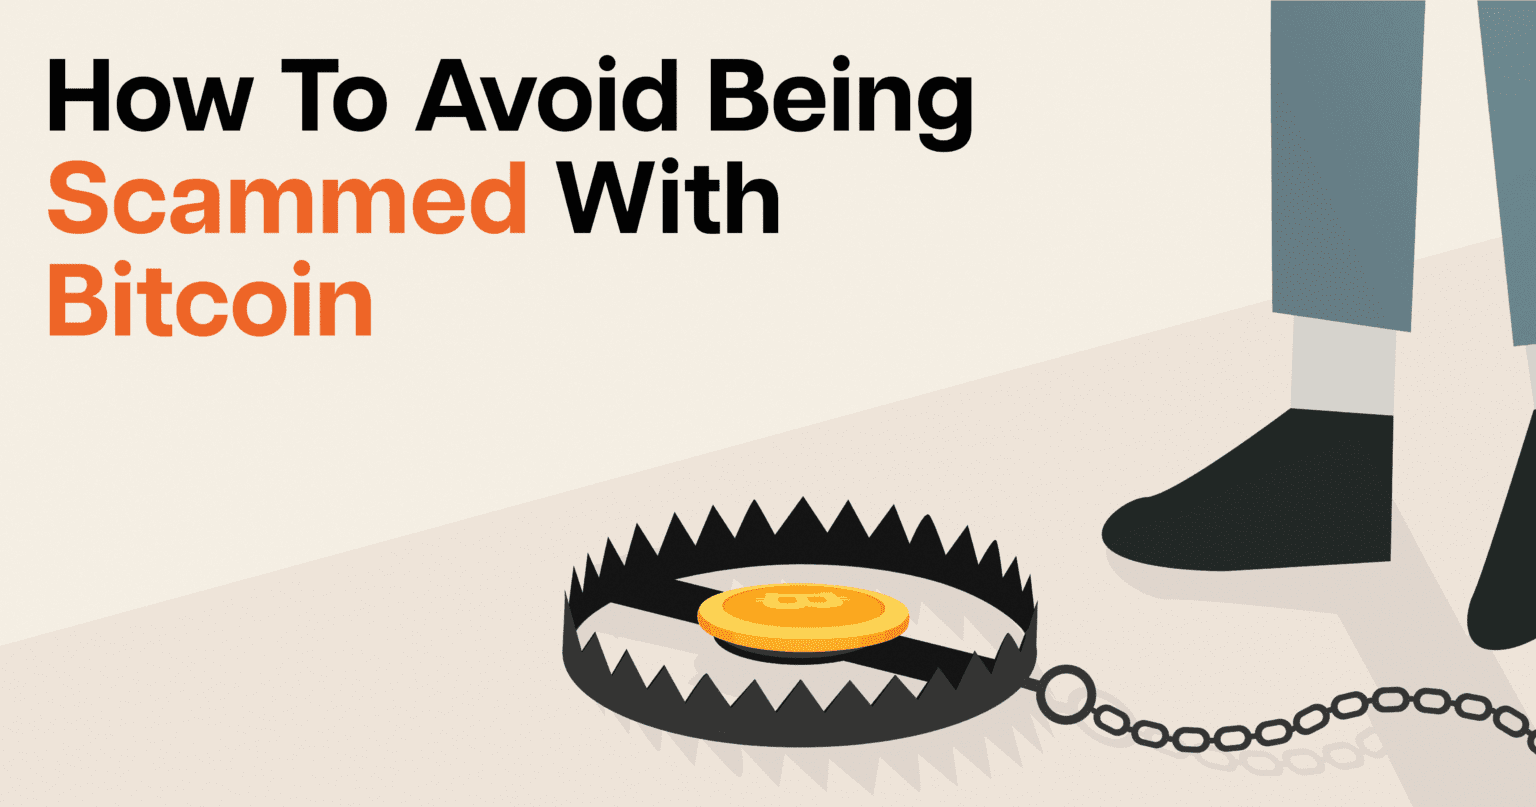 How To Avoid Being Scammed With Bitcoin